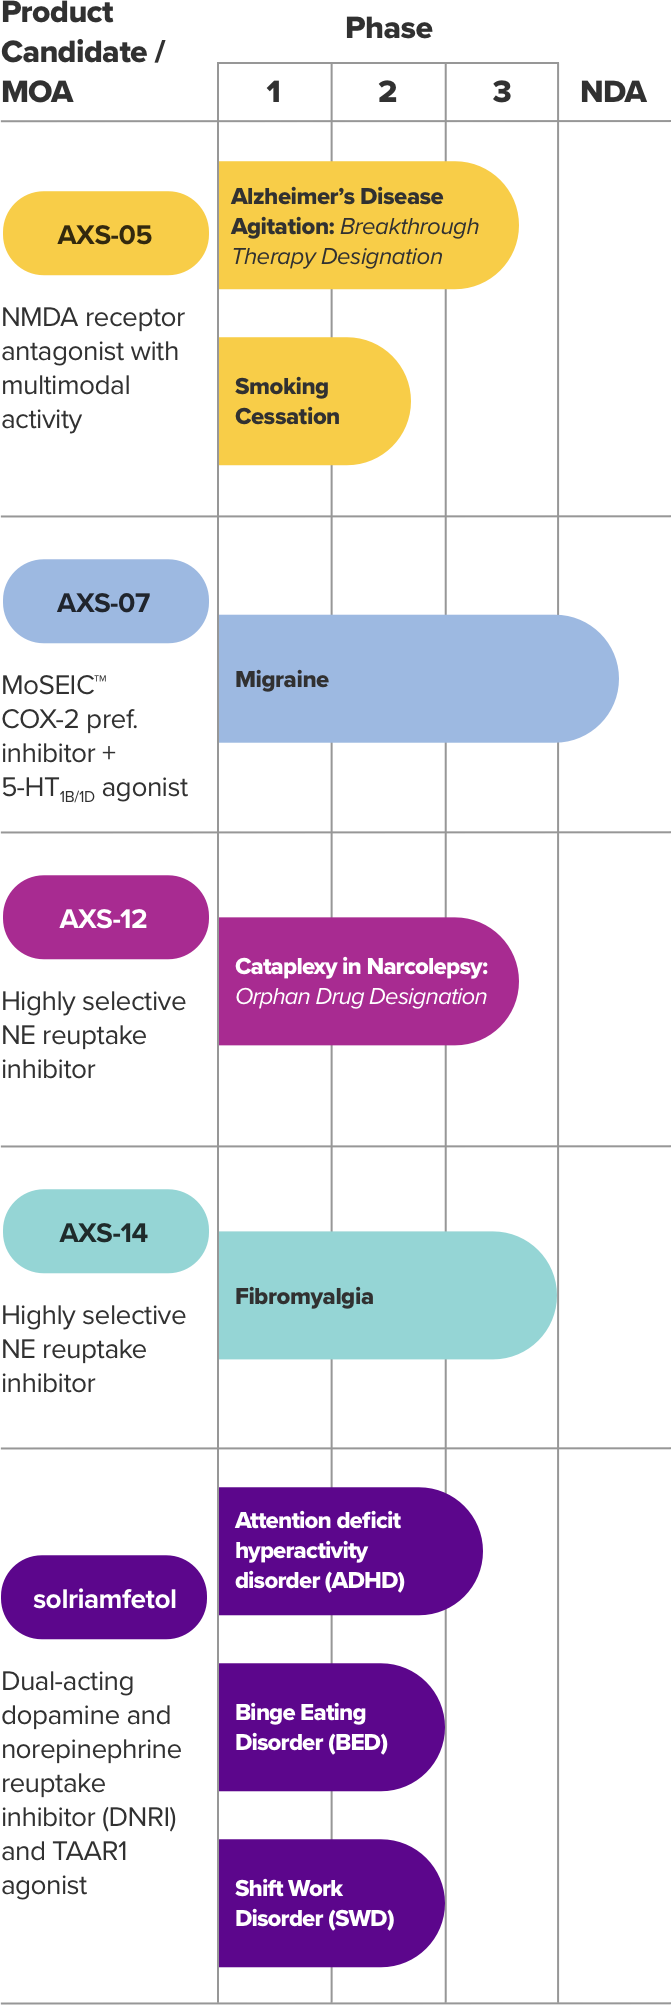 chart showing the progress of four Axsome product candidates: axs-05, axs-07, axs-12 and axs-14